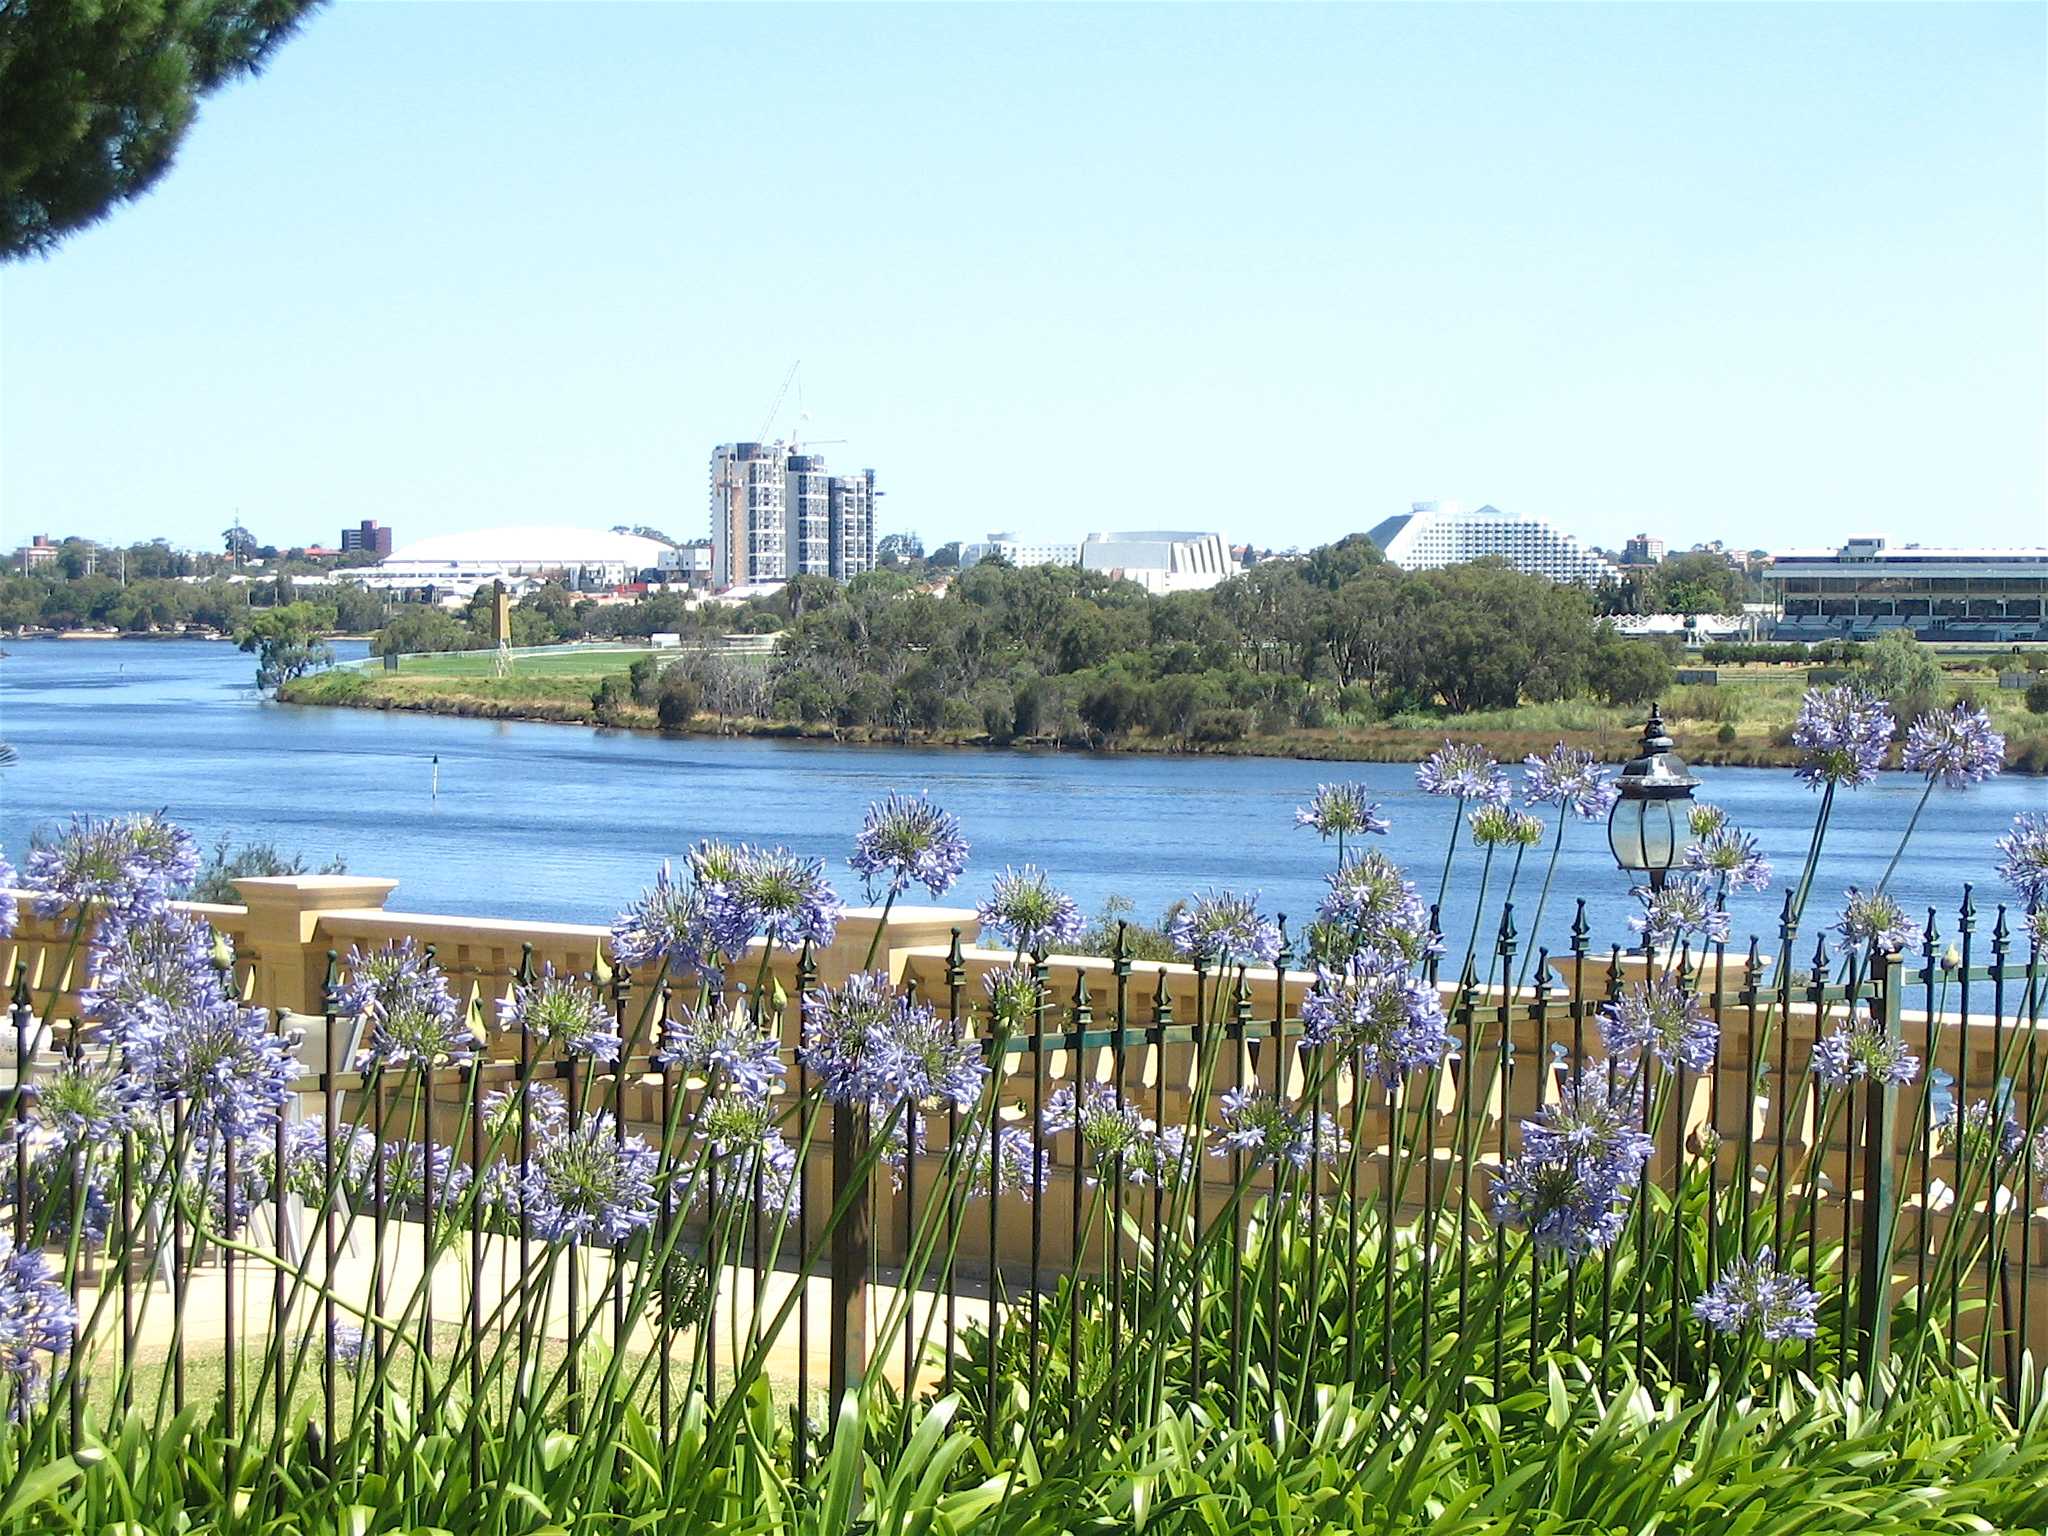 The beautiful view of Burswood